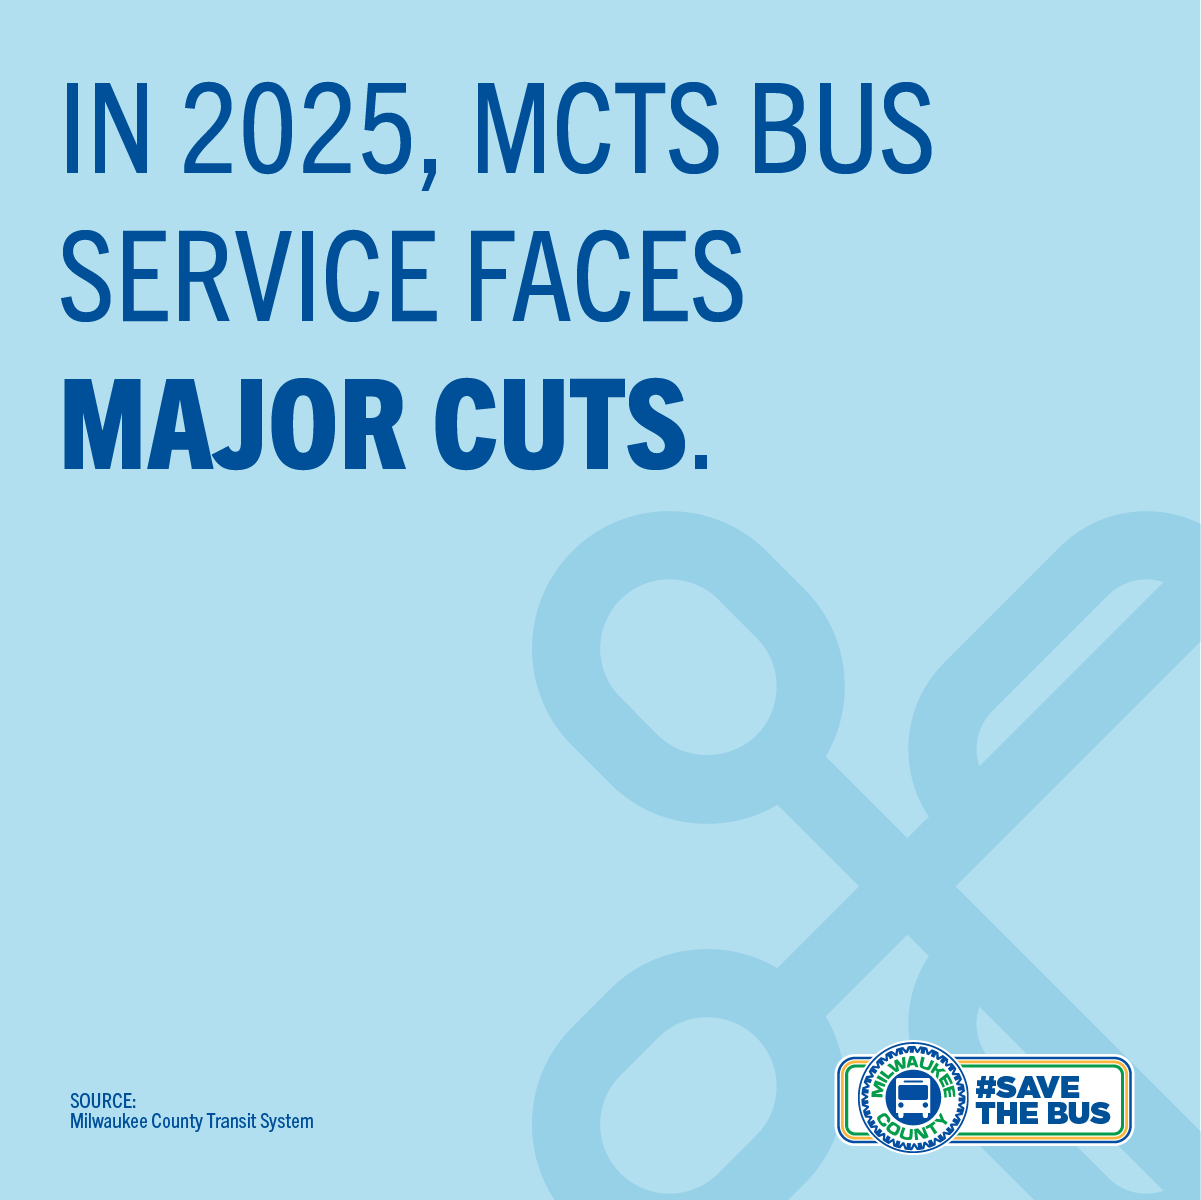 In 2025, MCTS bus service faces major cuts.